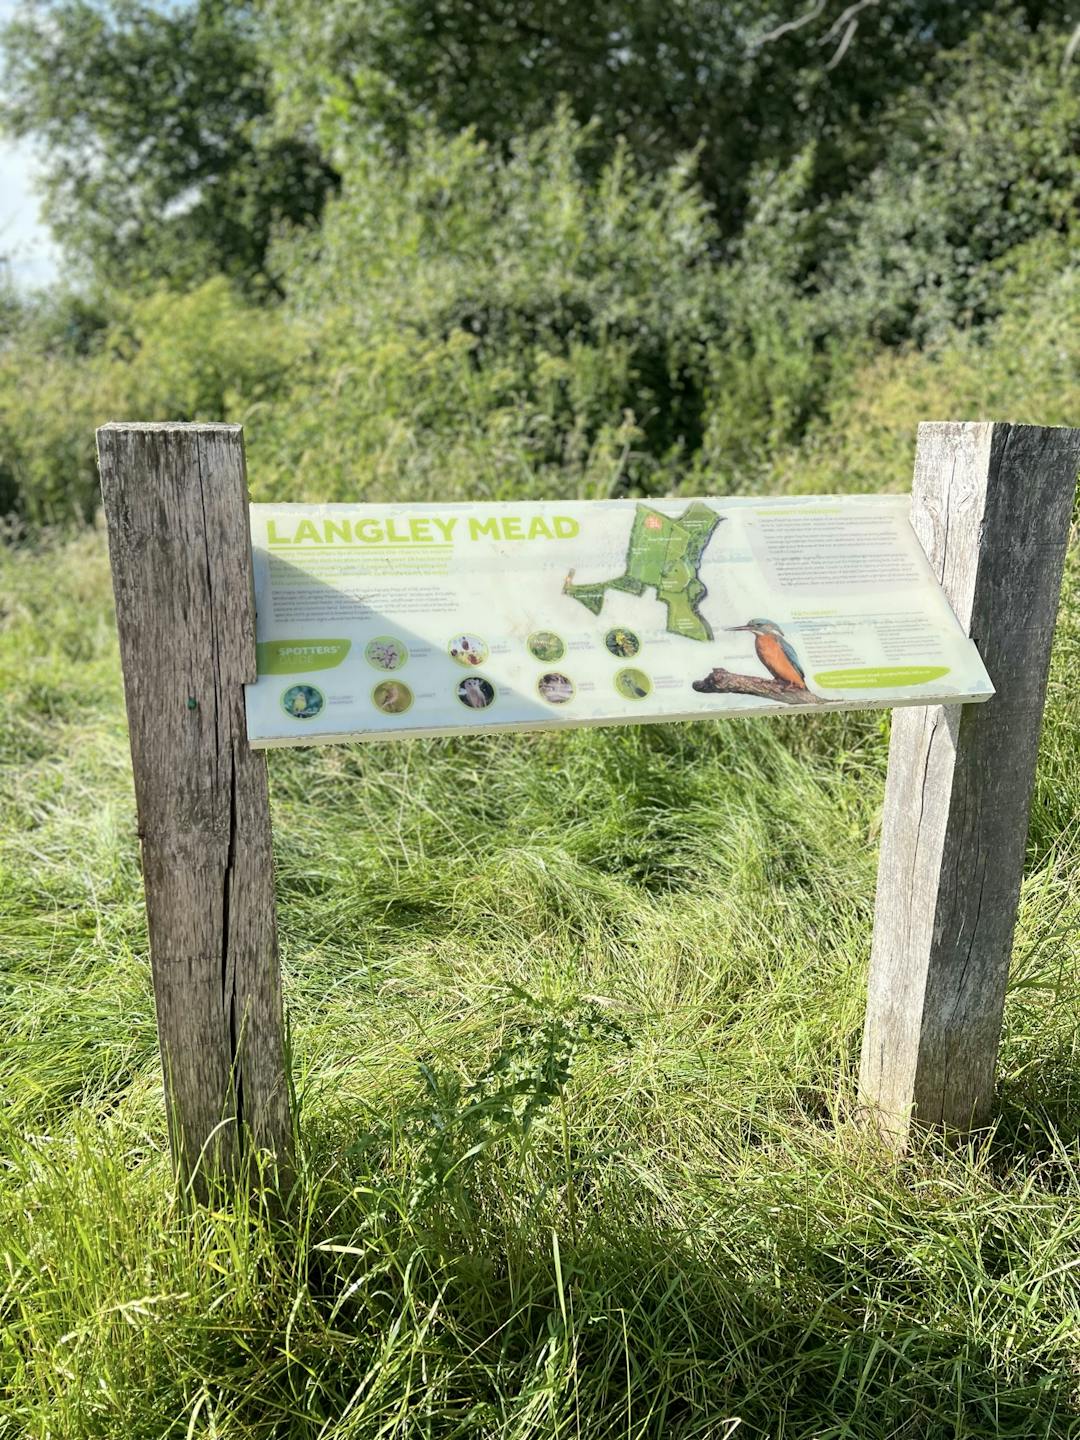 Langley Mead Nature Reserve  - image 1